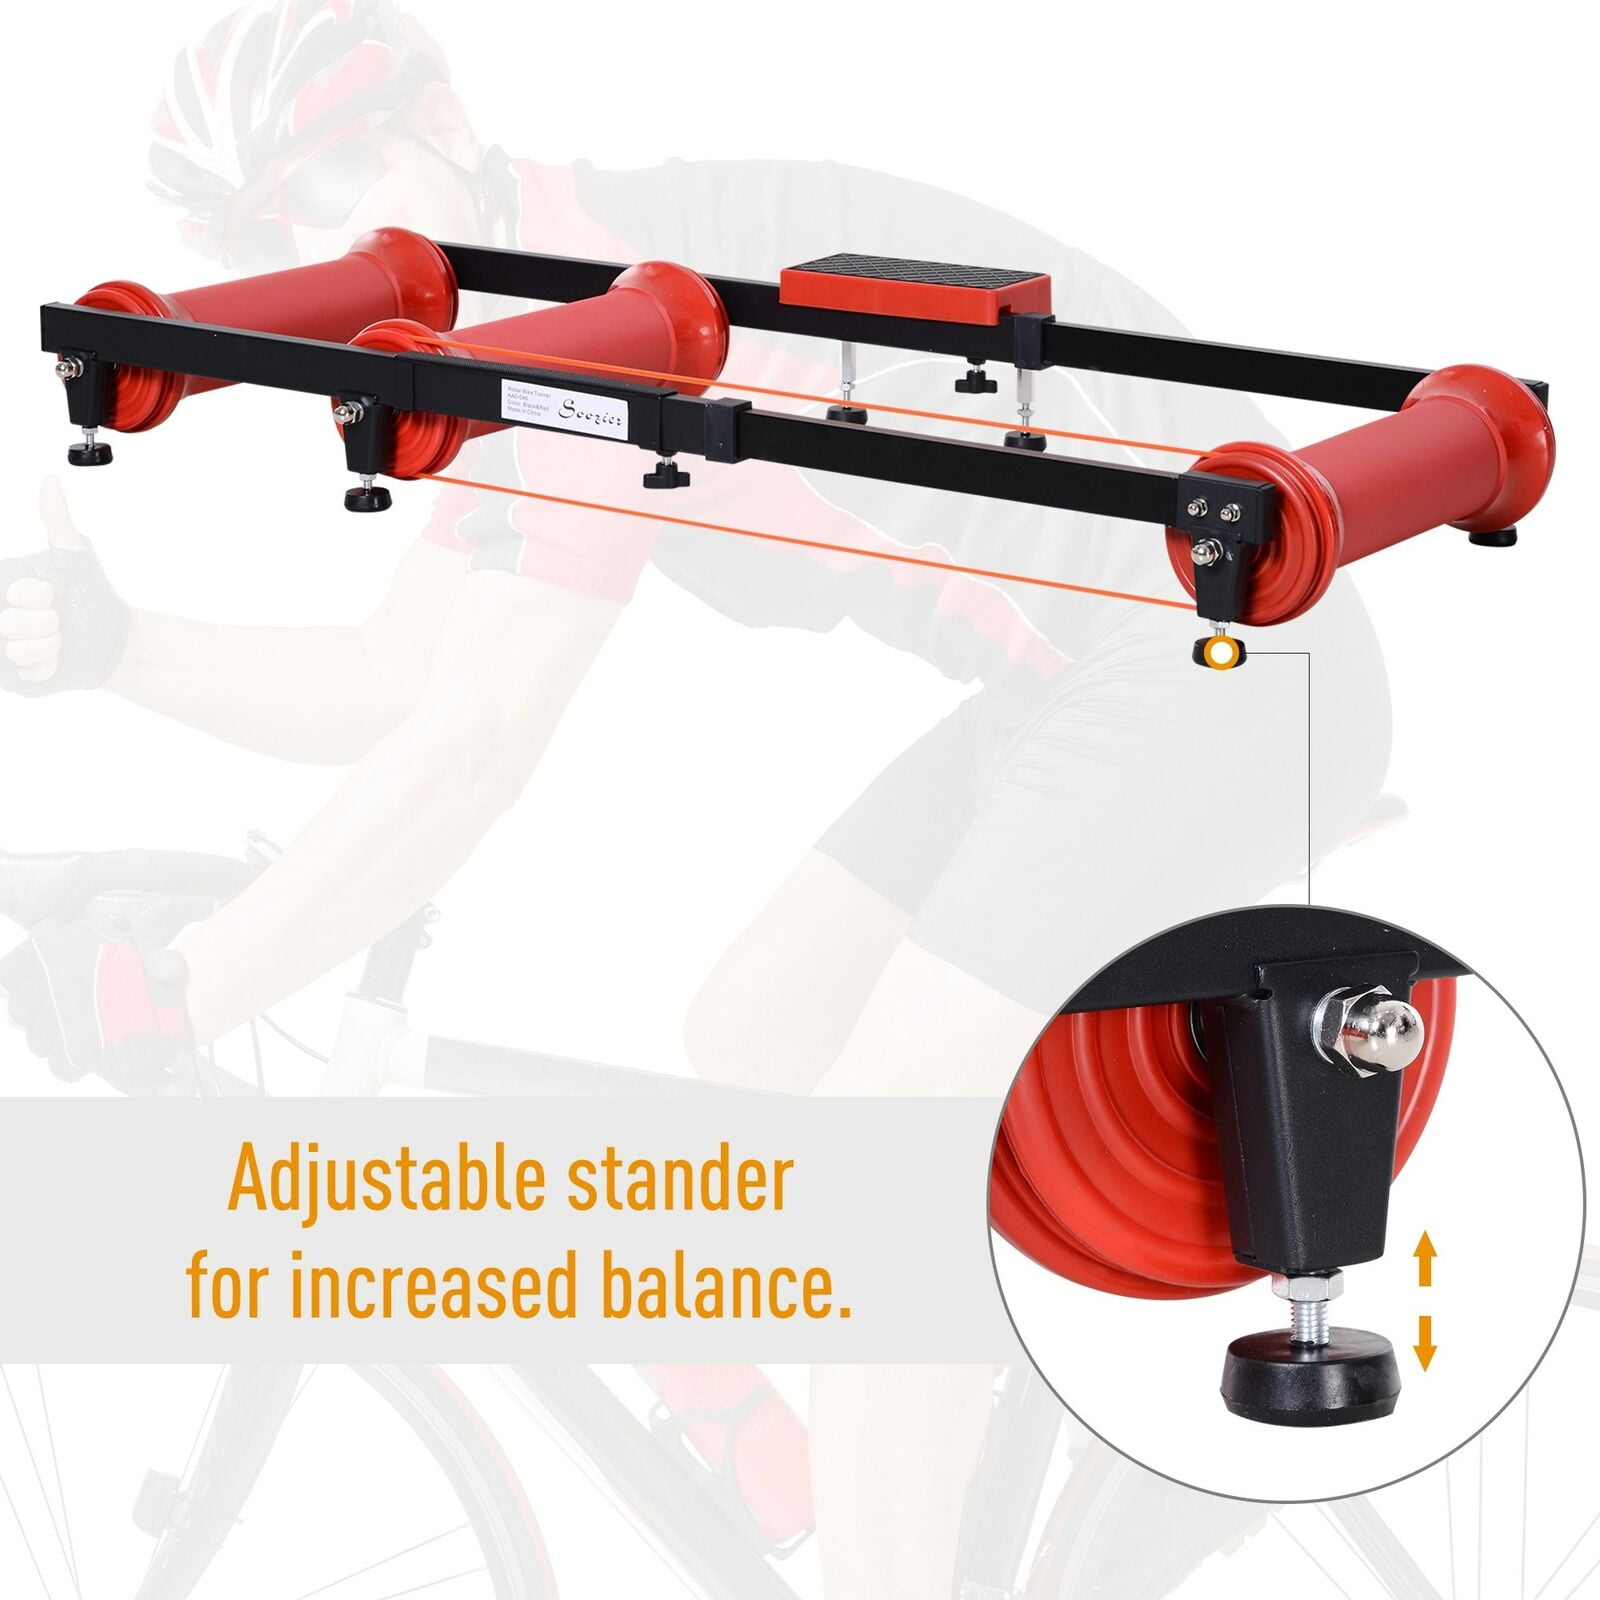 Details about   Adjustable Indoor Cycling Stationary Roller Bike Trainer Exercise Fitness ❉❉❉ 